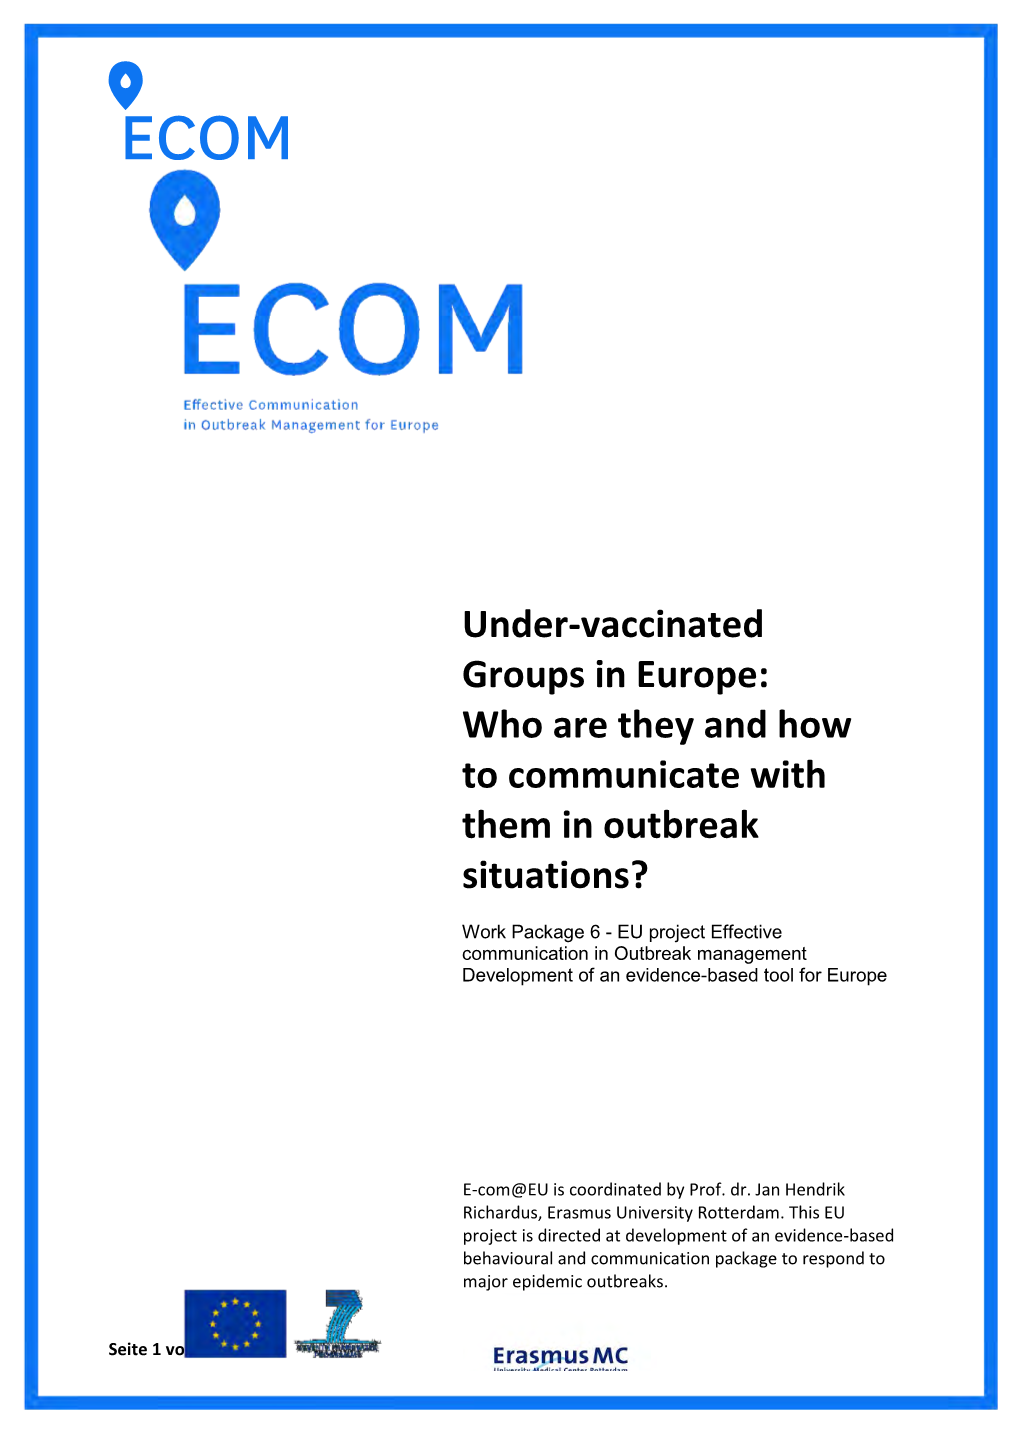 Under-Vaccinated Groups in Europe: Who Are They and How to Communicate with Them in Outbreak Situations?